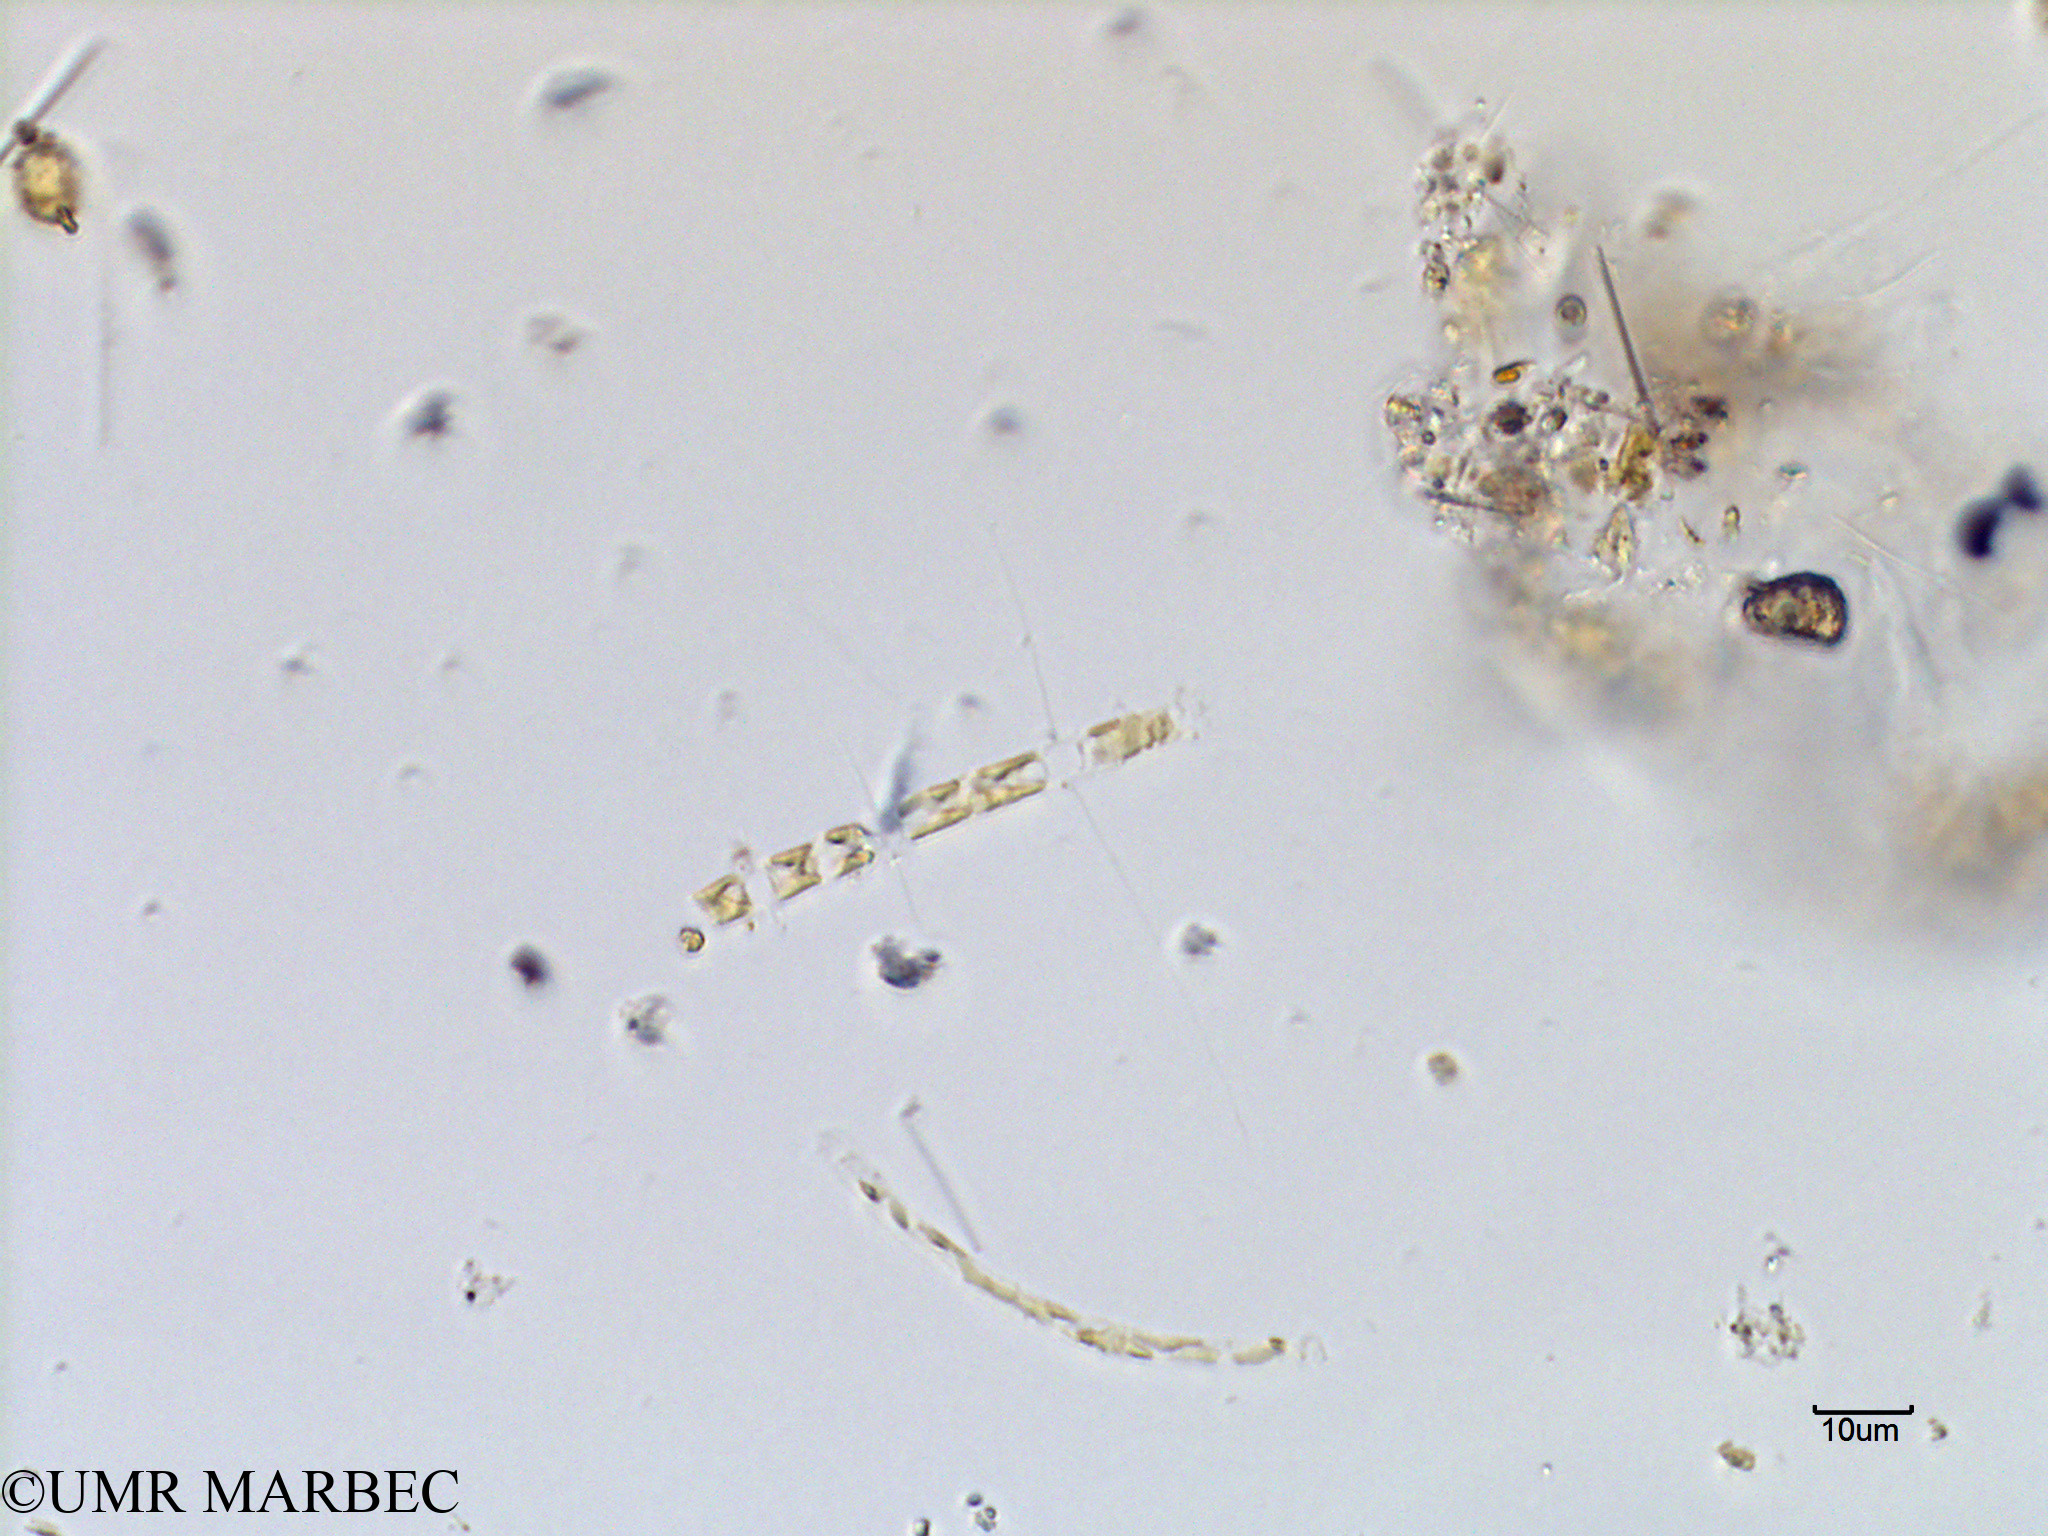 phyto/Scattered_Islands/mayotte_lagoon/SIREME May 2016/Chaetoceros holsaticus (MAY3_cf chaetoceros sp34-4).tif(copy).jpg